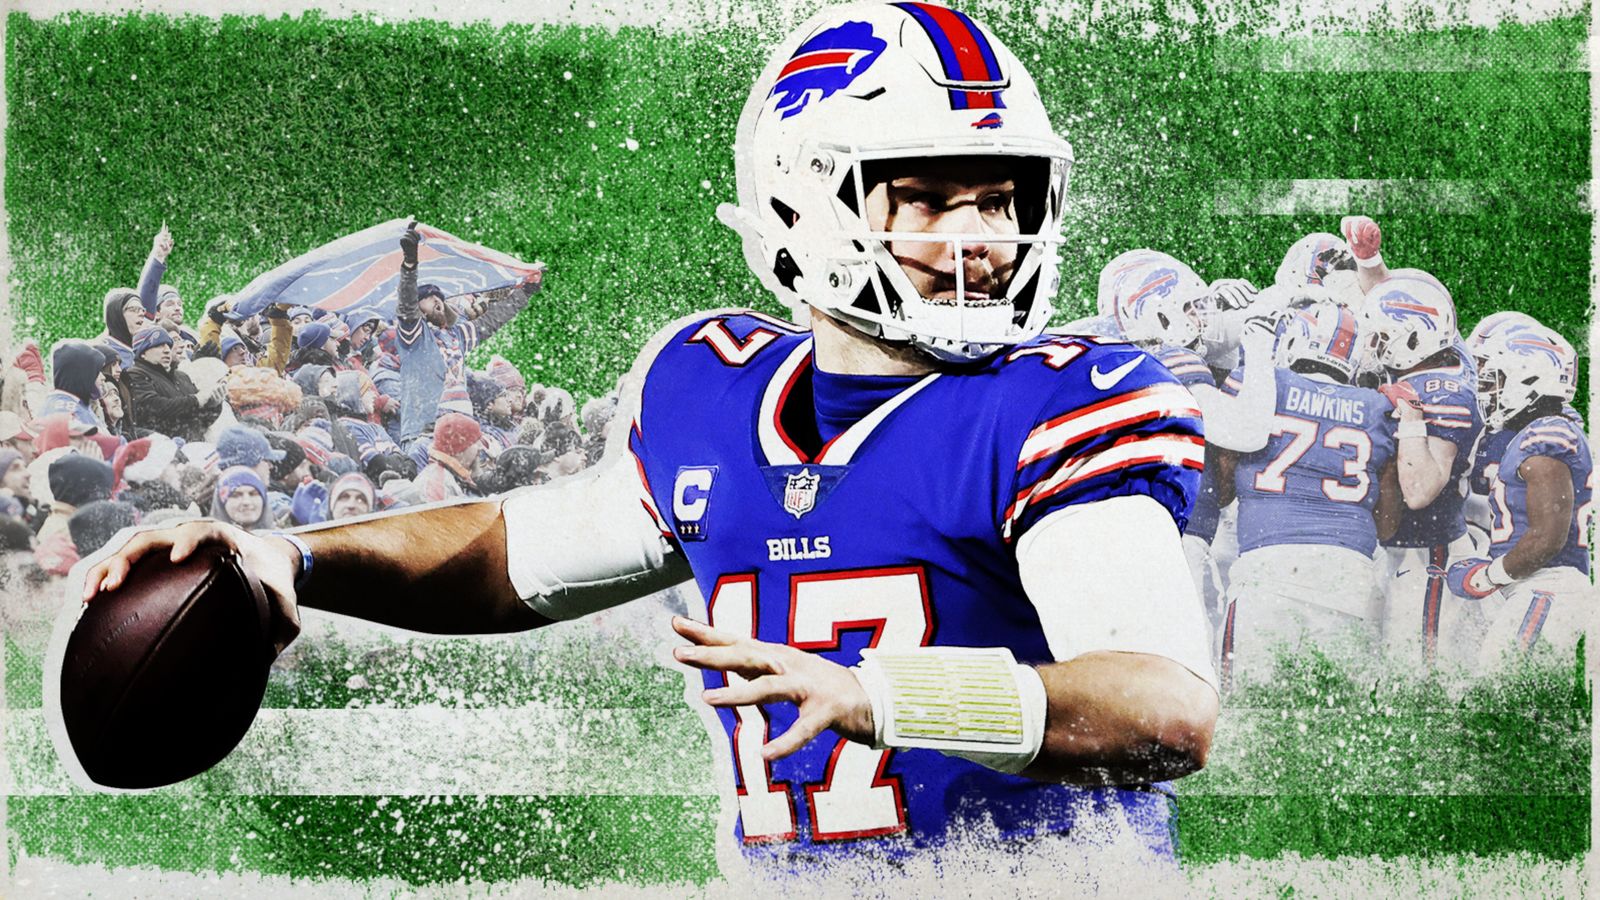 Bills vs. Dolphins broadcast map: All around the country - Buffalo